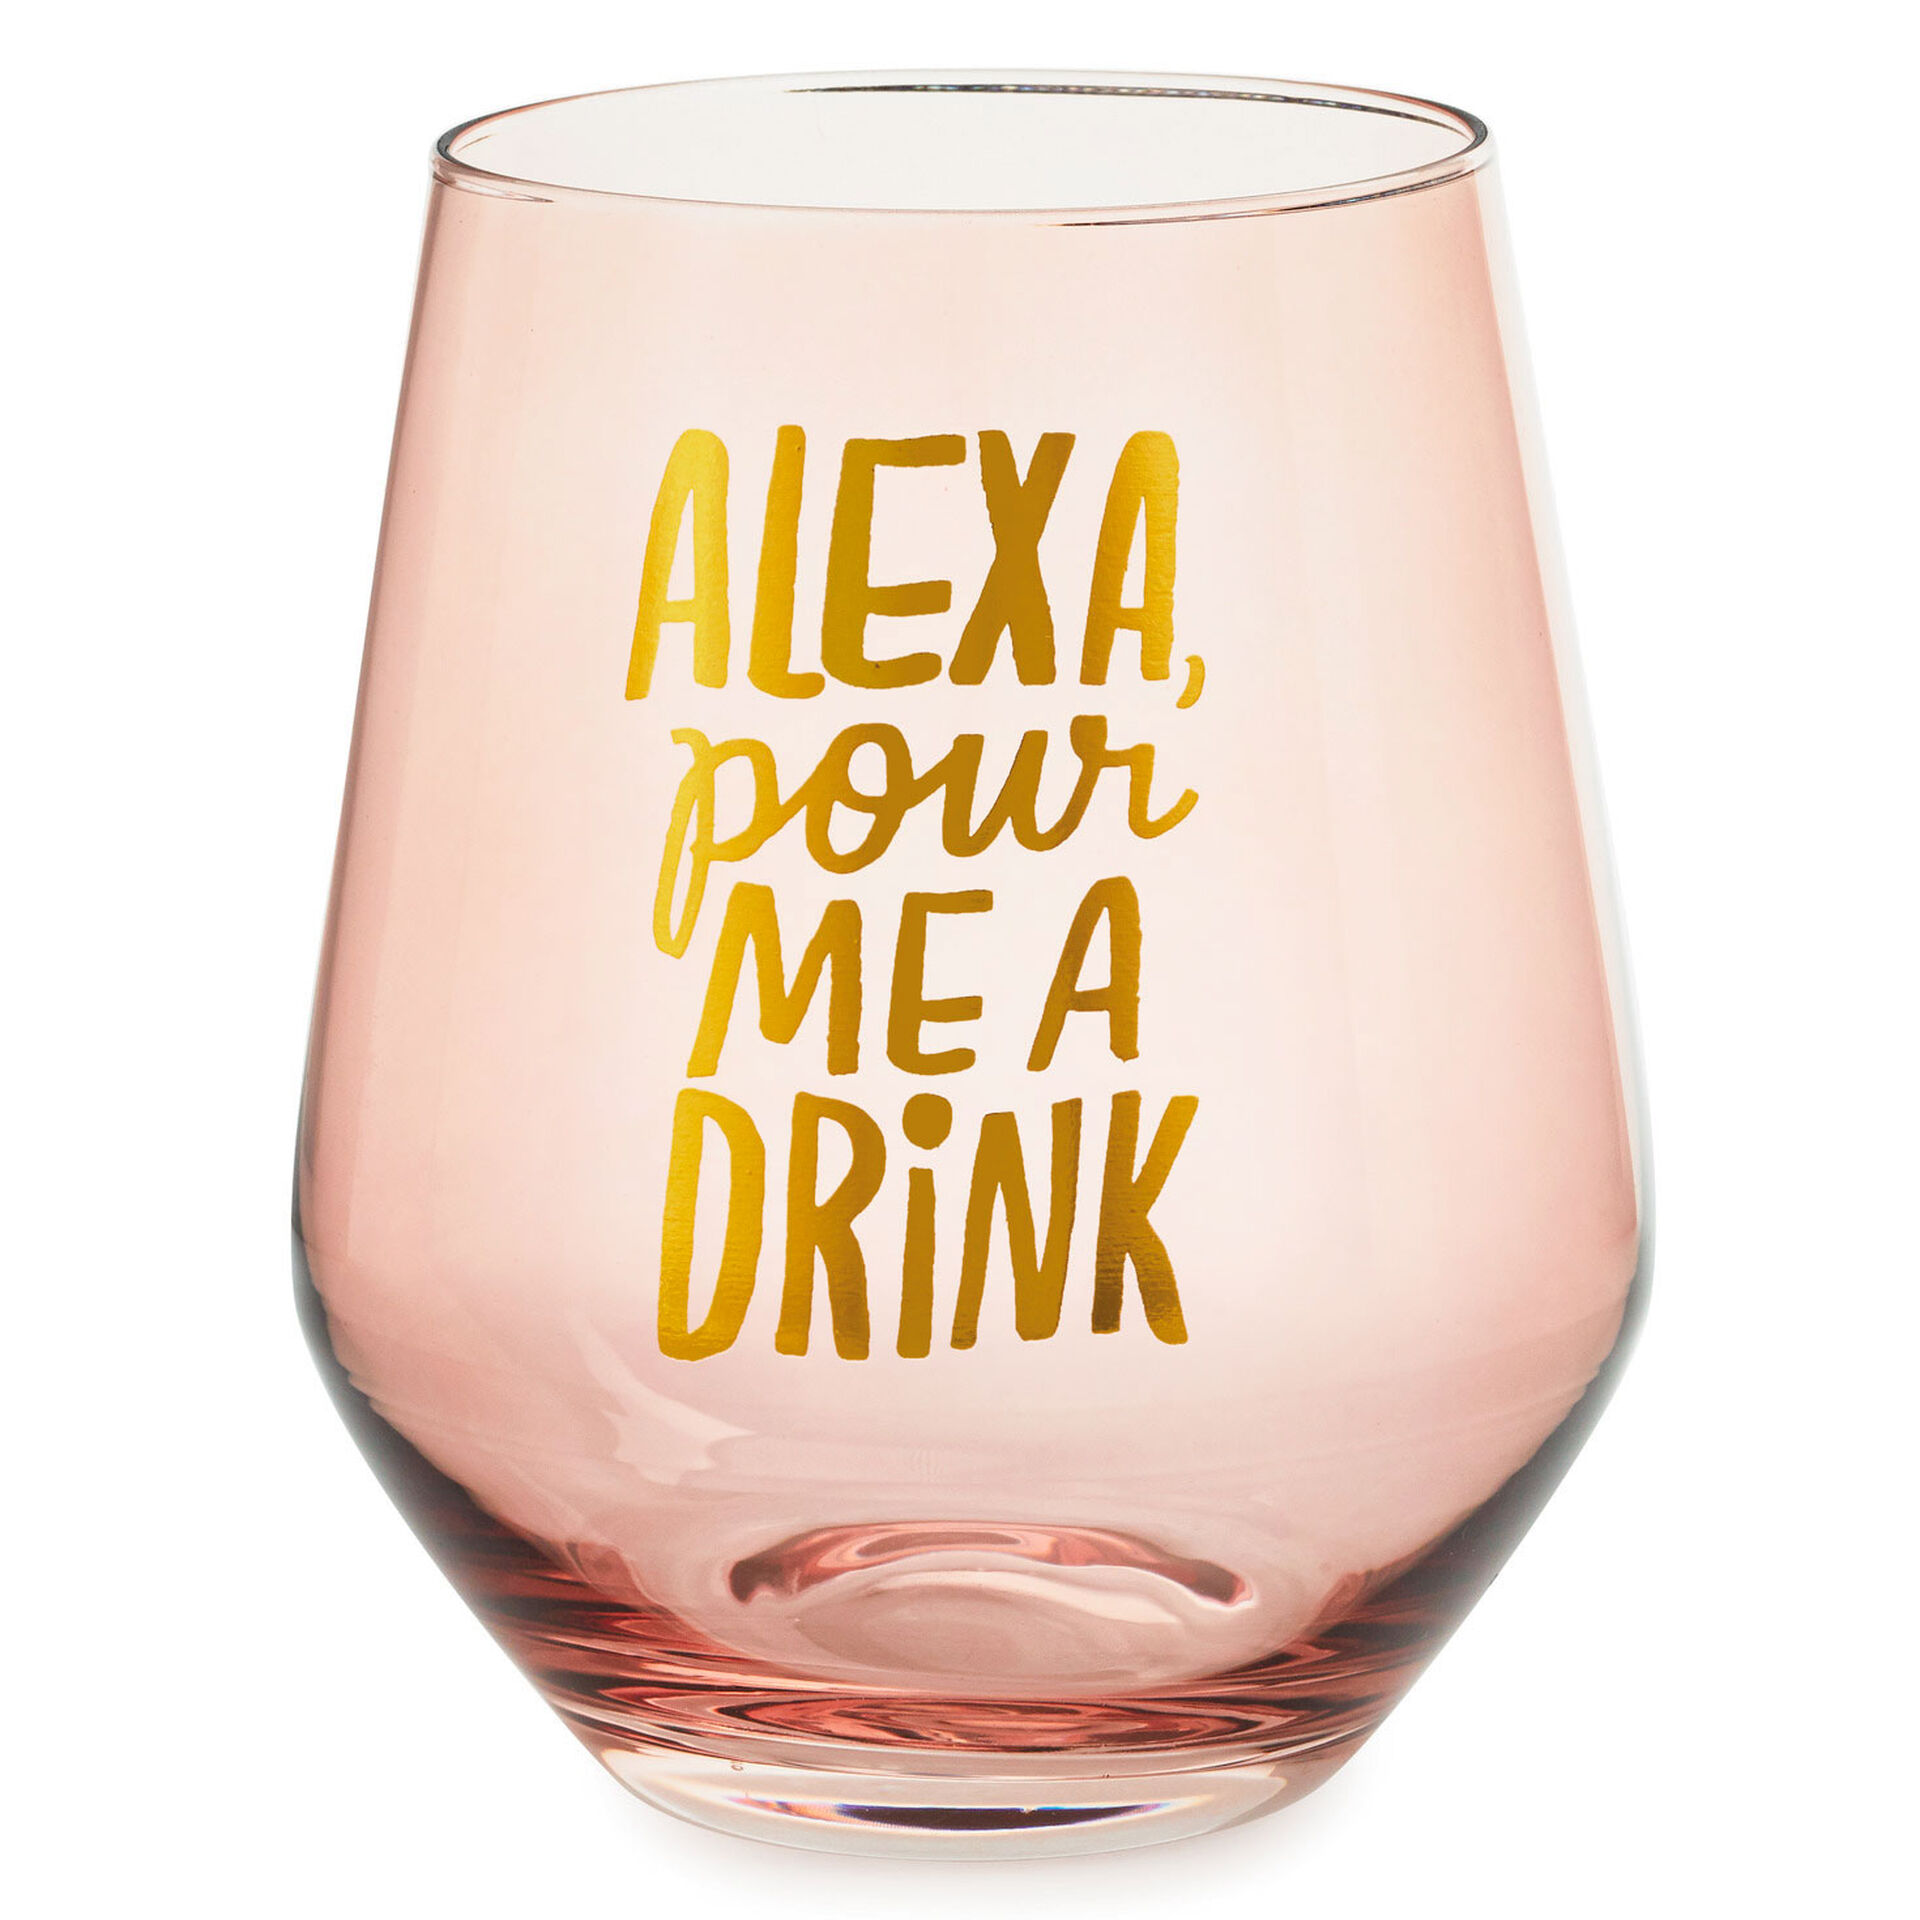 Alexa Pour Me A Drink Stemless Wine Glass 14 Oz Wine Glasses And Wine 